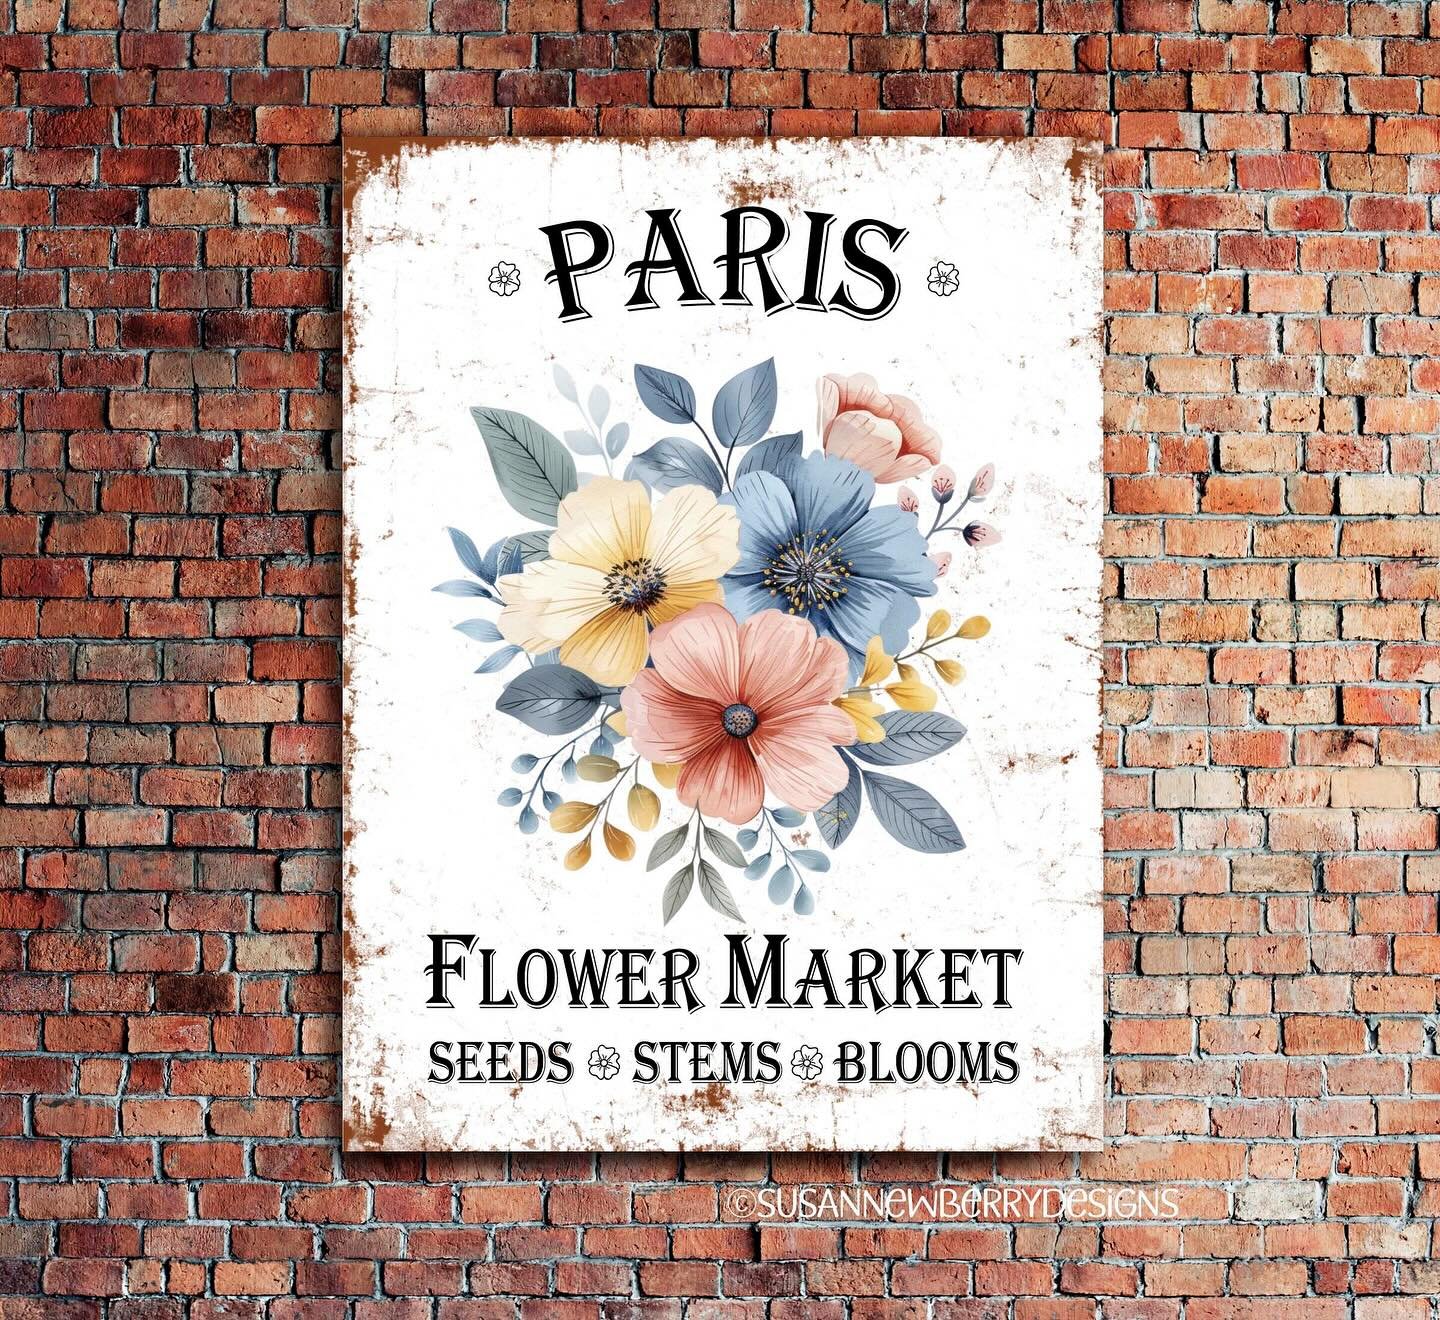 🌸✨ Introducing Elegance That Lasts! ✨🌸
Our newest collection takes you straight to the heart of Paris with our Metal Prints - where the charm of the Paris Flower Market blooms in your space! 🗼🌹
Not only are these pieces a visual delight, but they